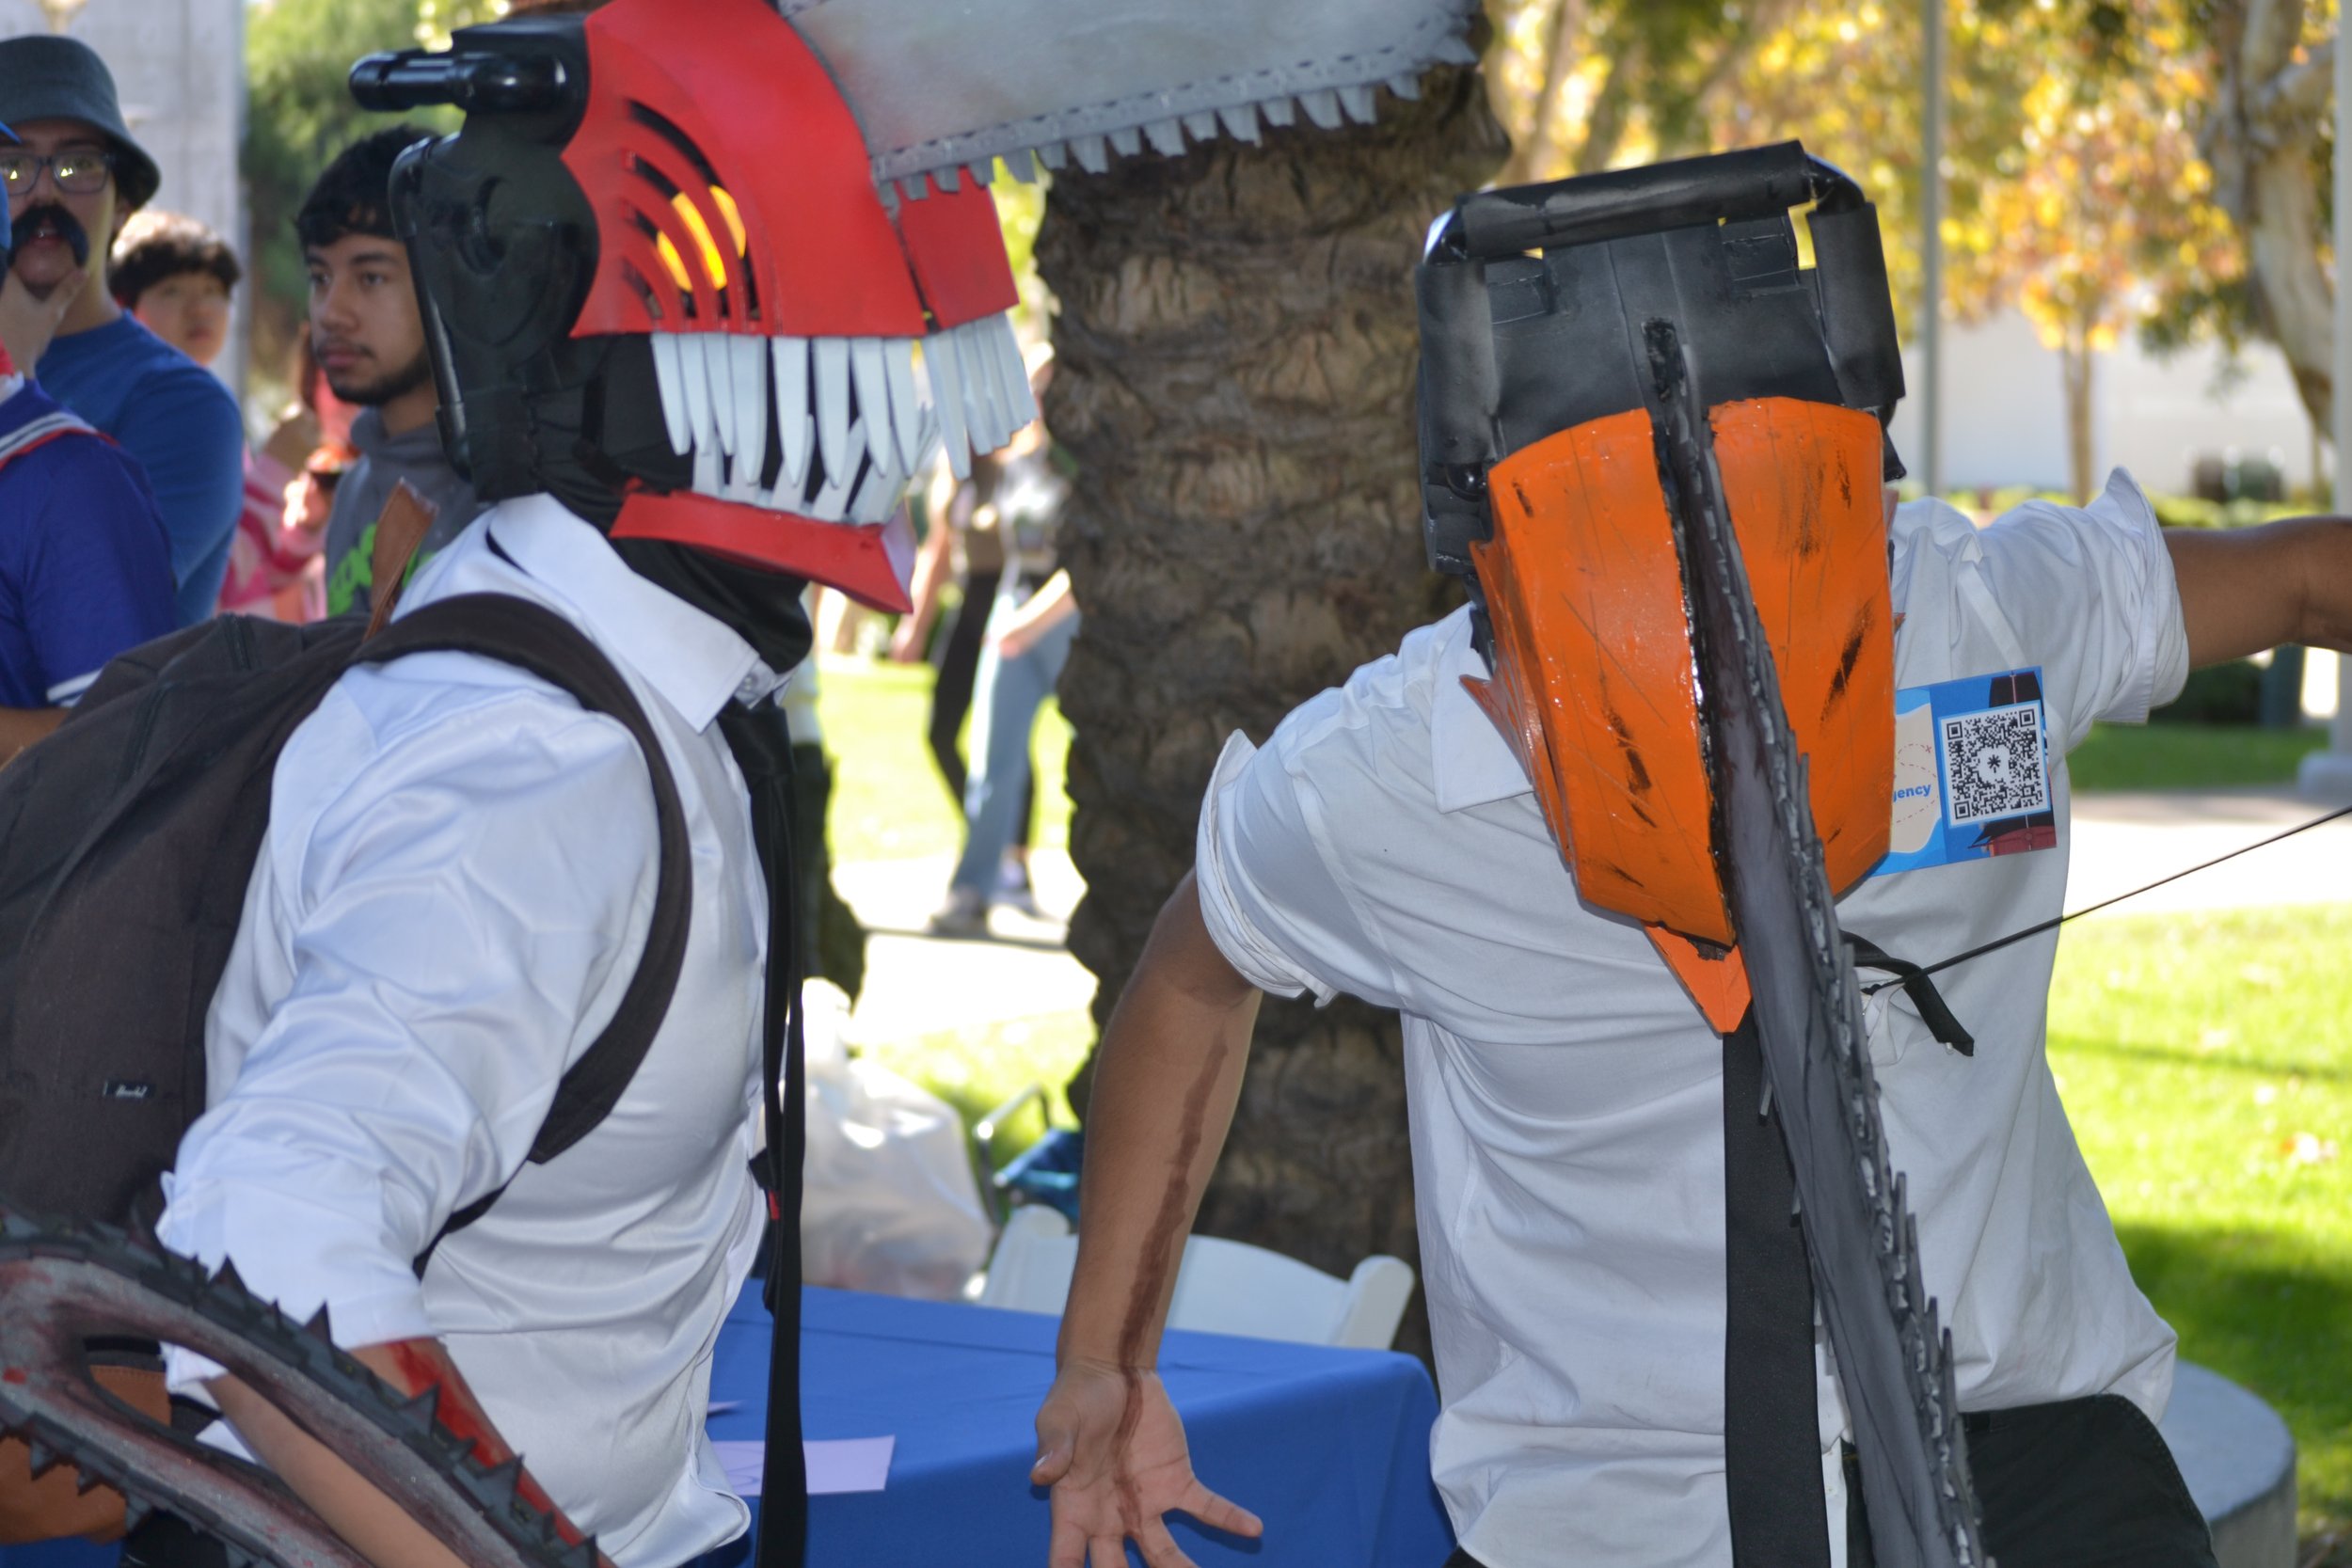  Jeb Austria (left) and Joseph Munoz (right) from The Pathfinders Creative Agency Marketing Club both cosplays as "Denji" from a anime "Chainsaw Man" at Santa Monica College's Club Row event at Santa Monica, Calif. on Tuesday, October 31, 2023 (Aminn